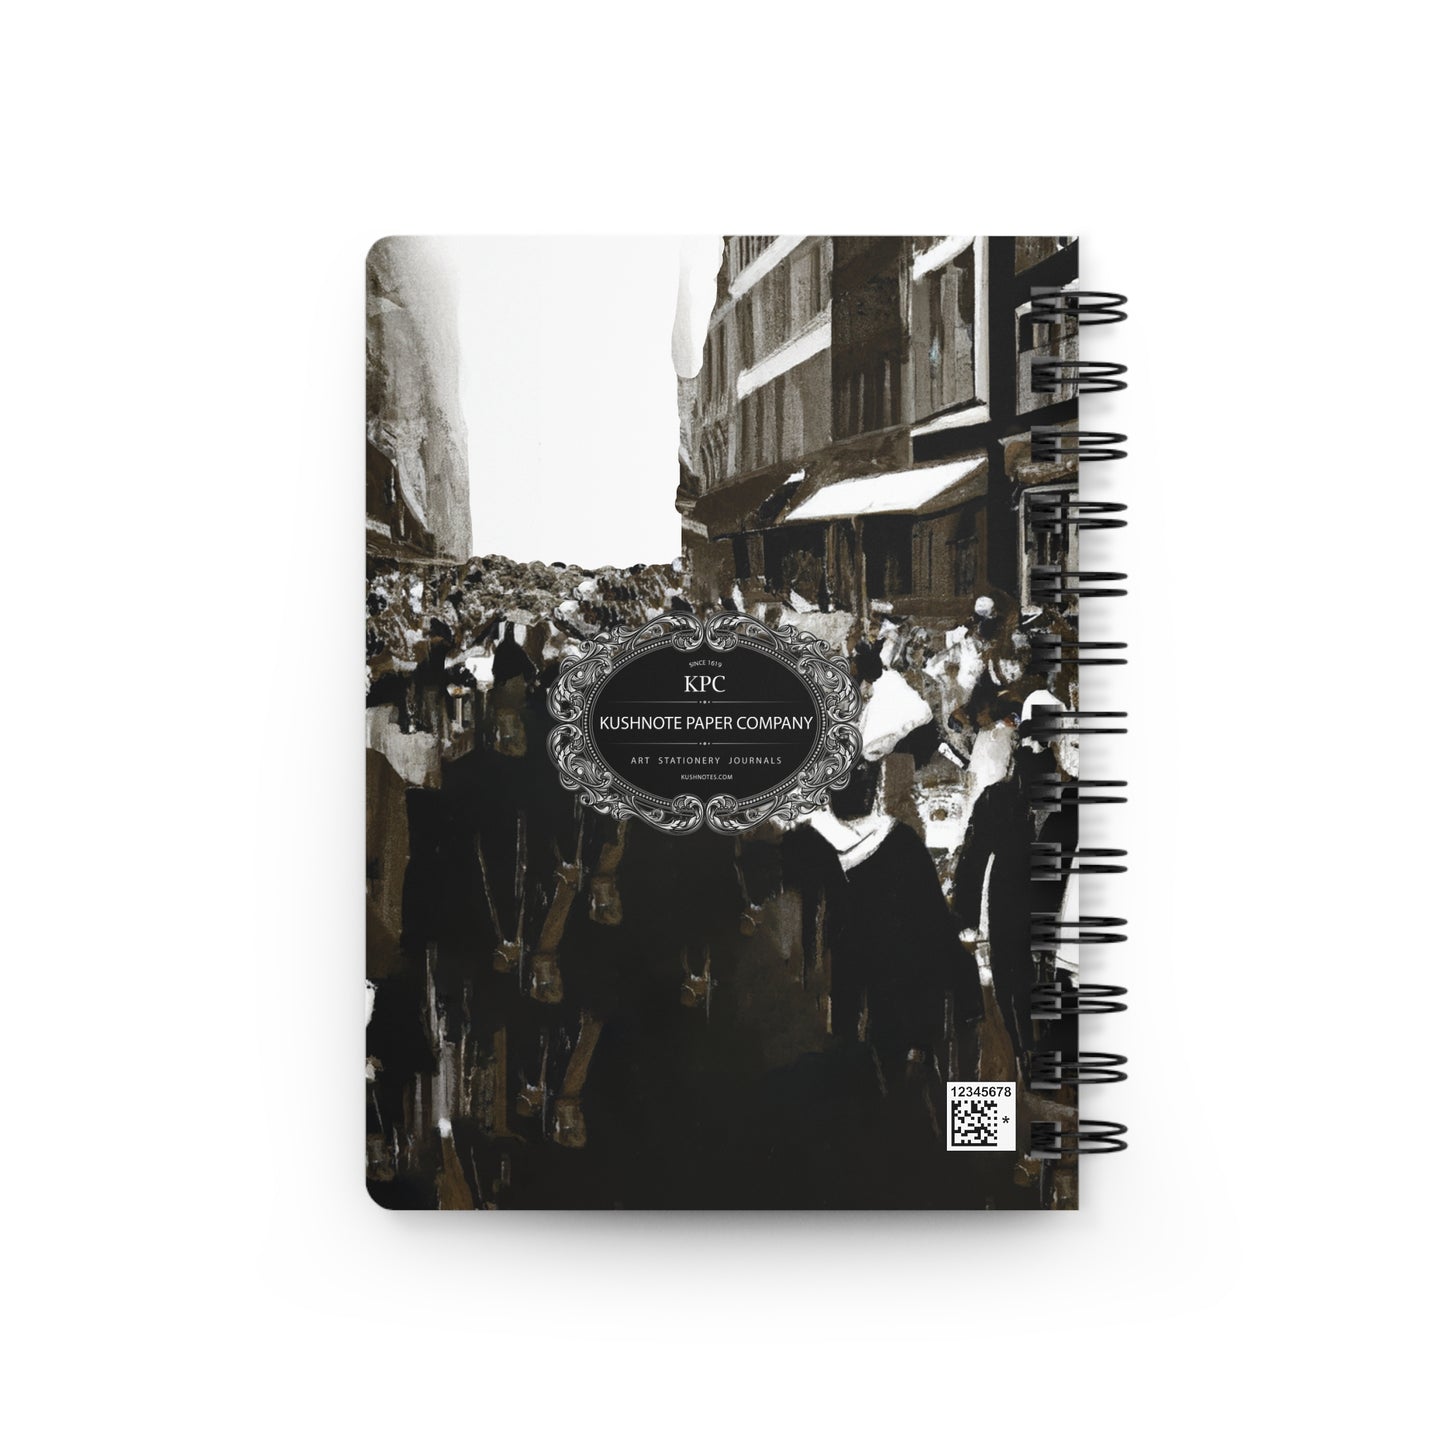 Flossy Black & White Spiral Bound Notebooks and Journals with 2023-2024 Year-at-a-Glance Calendar